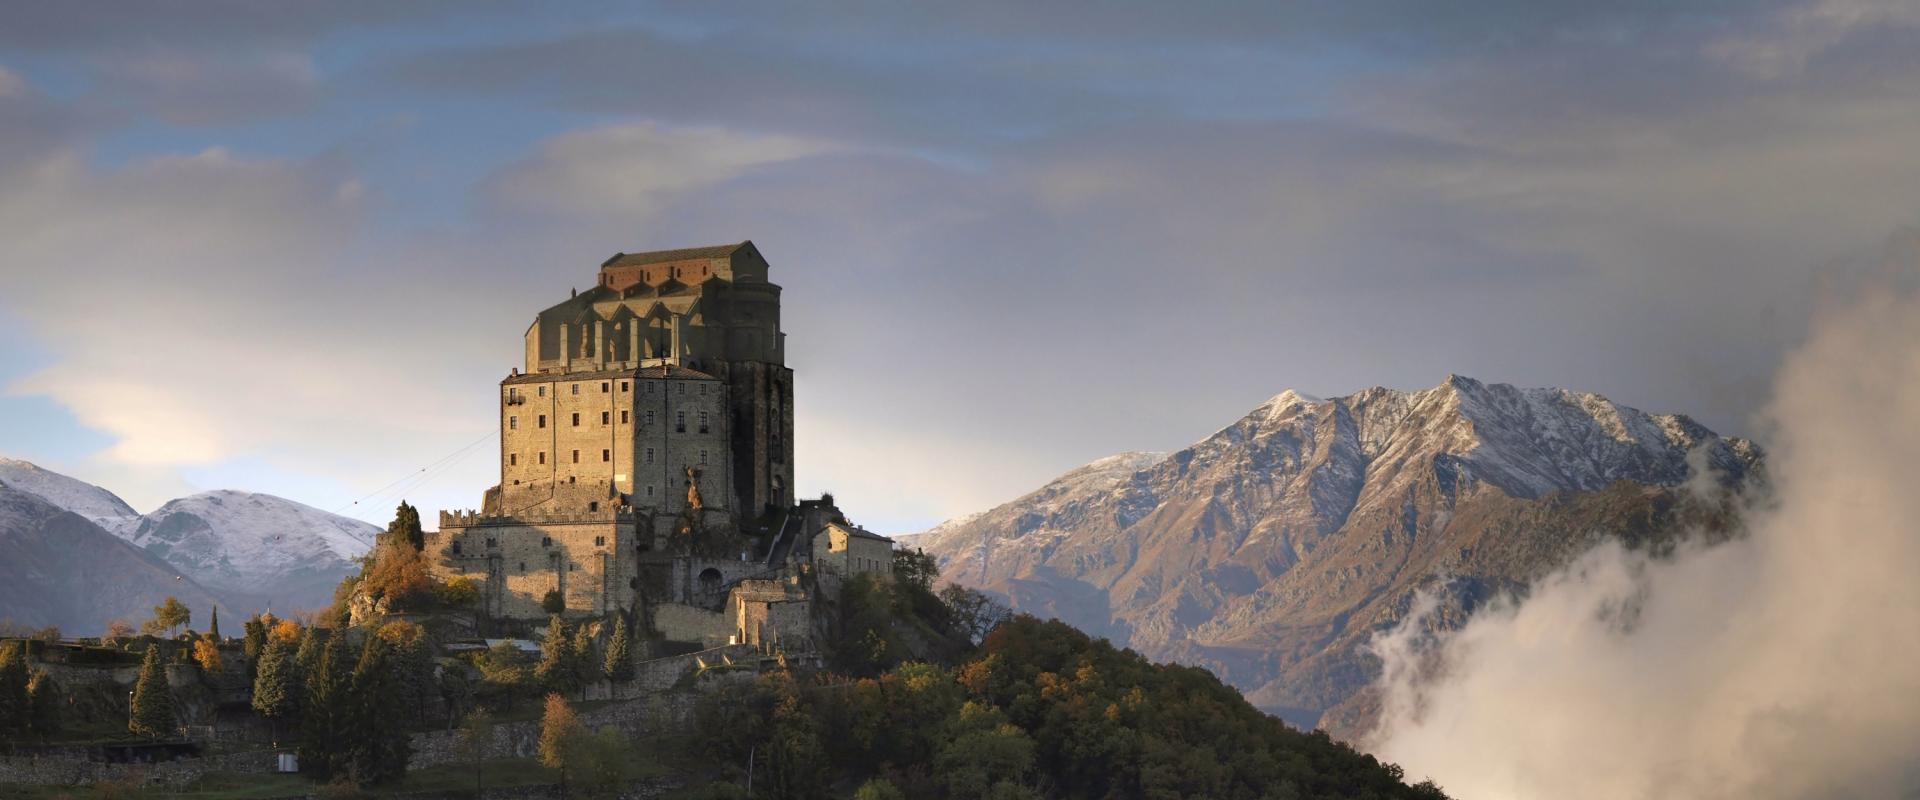 Visit of the Sacra of san Michele